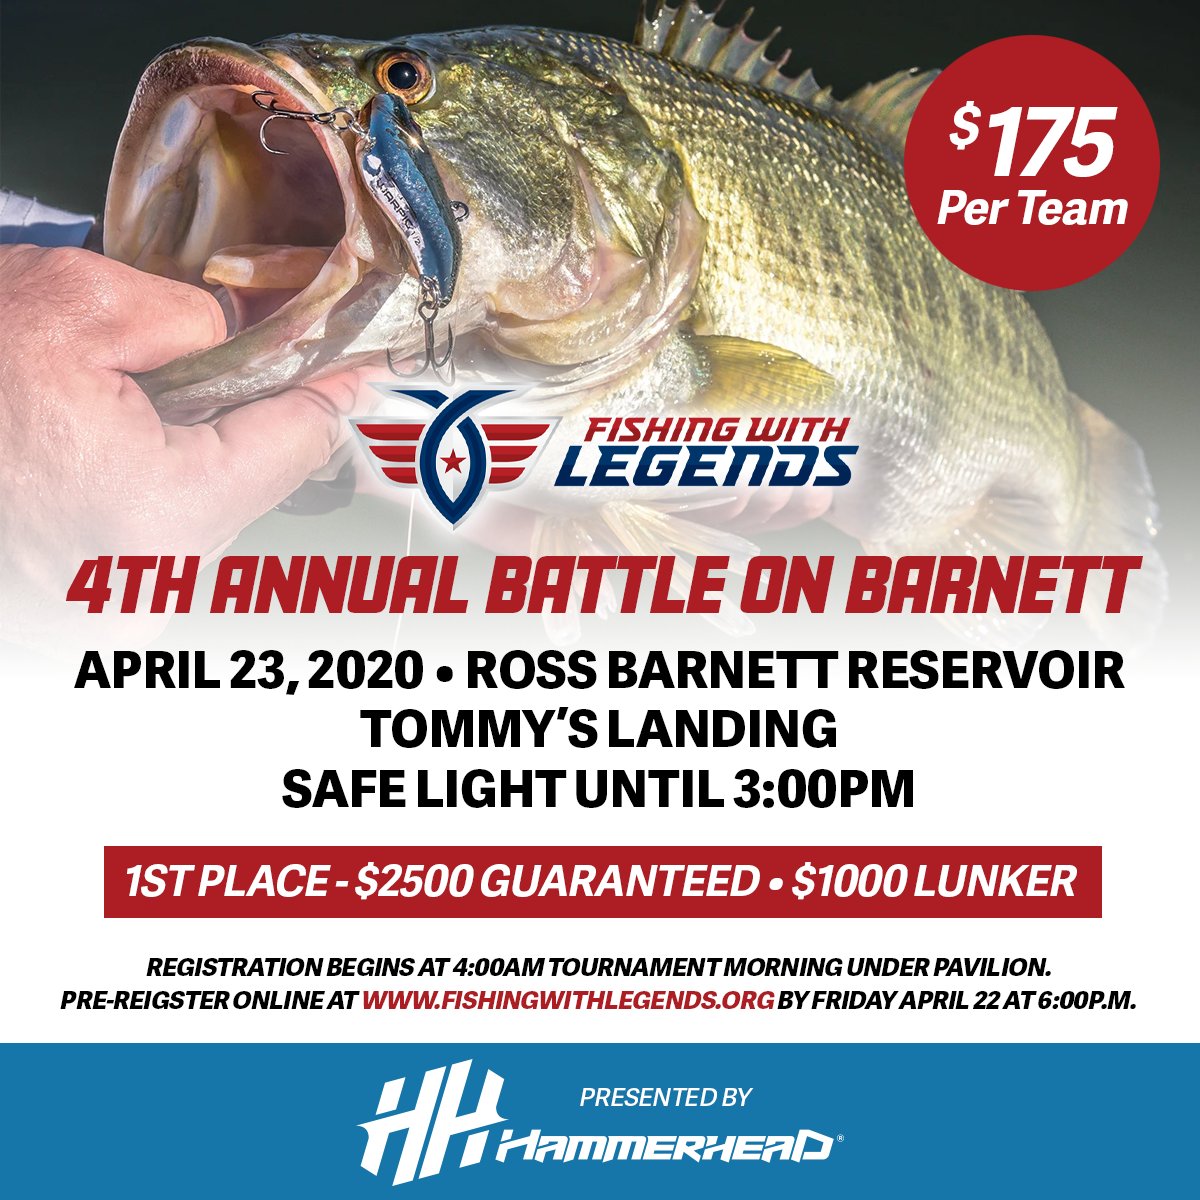 Join us for the 4th Annual Battle on the Barnett today! All proceeds go directly to supporting our American Heroes! 
#veterans #fishingwithlegends #hammerheadarmor